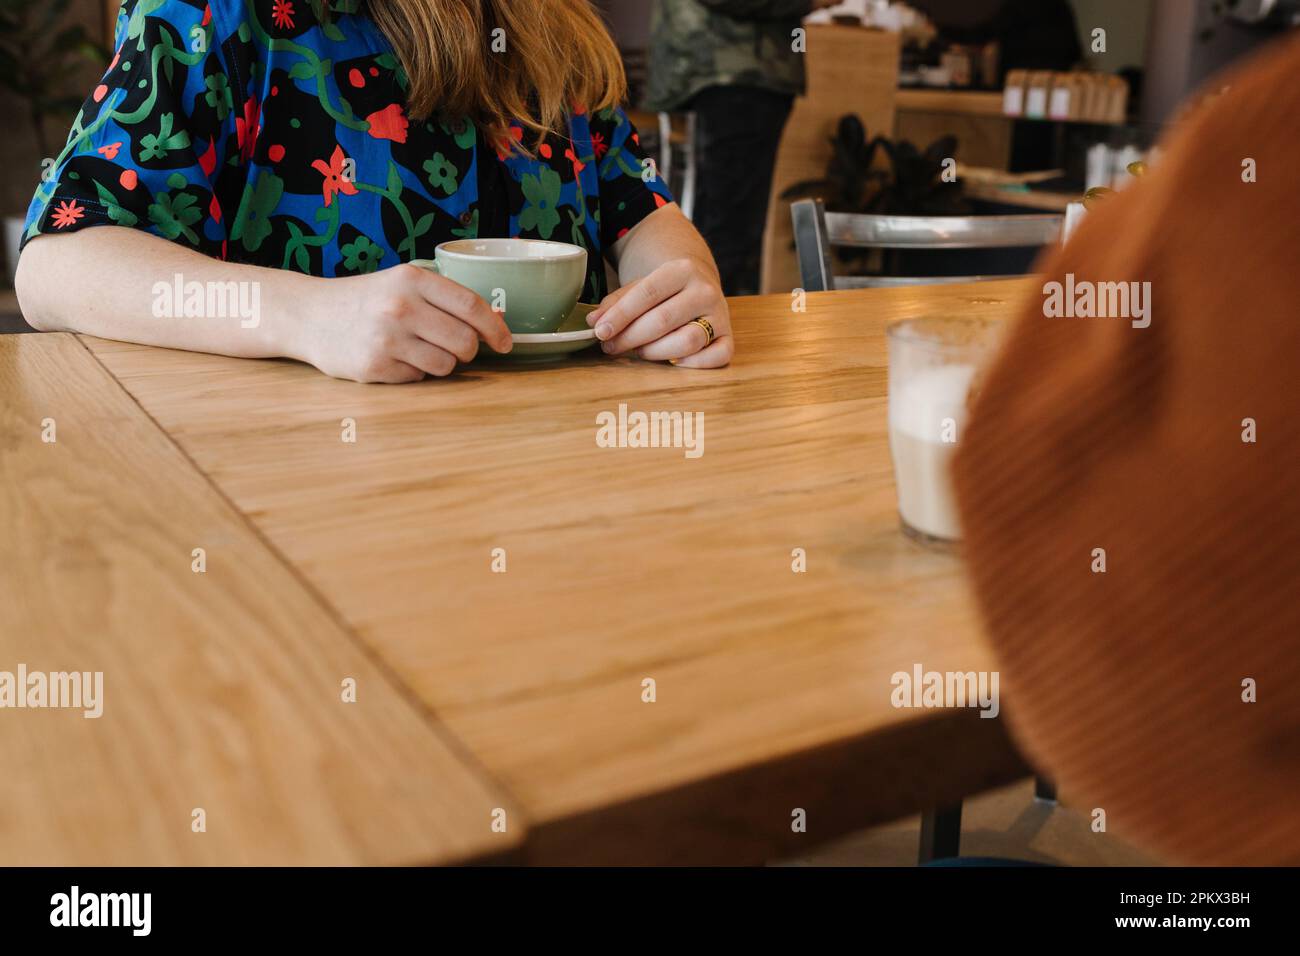 Two people’s hands & coffee mugs while sitting at table Stock Photo